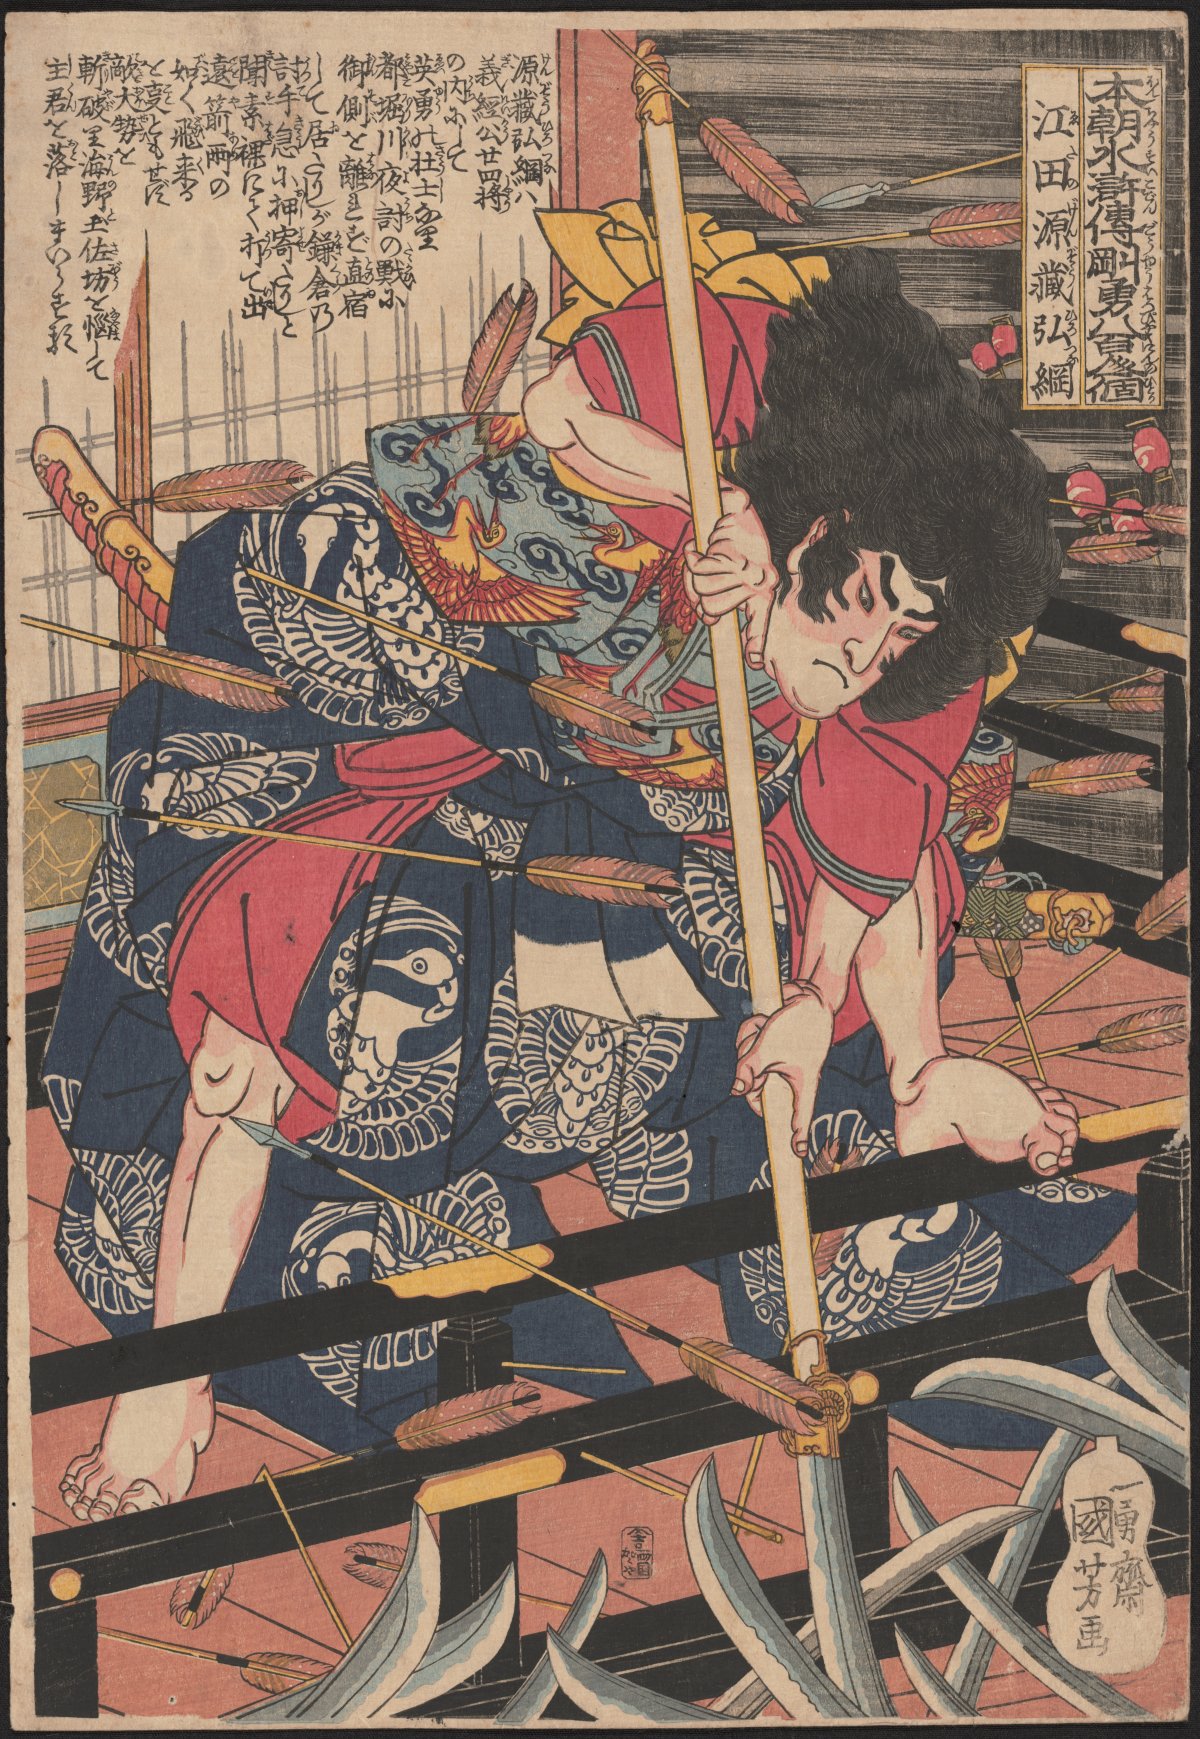 The prints depicts a young man fighting with a long-handled sword, against many soldiers of the opponent. His one leg is standing on a horizontal frame of the building.  A description of the events in the image are written in the top left corner in Japanese script.